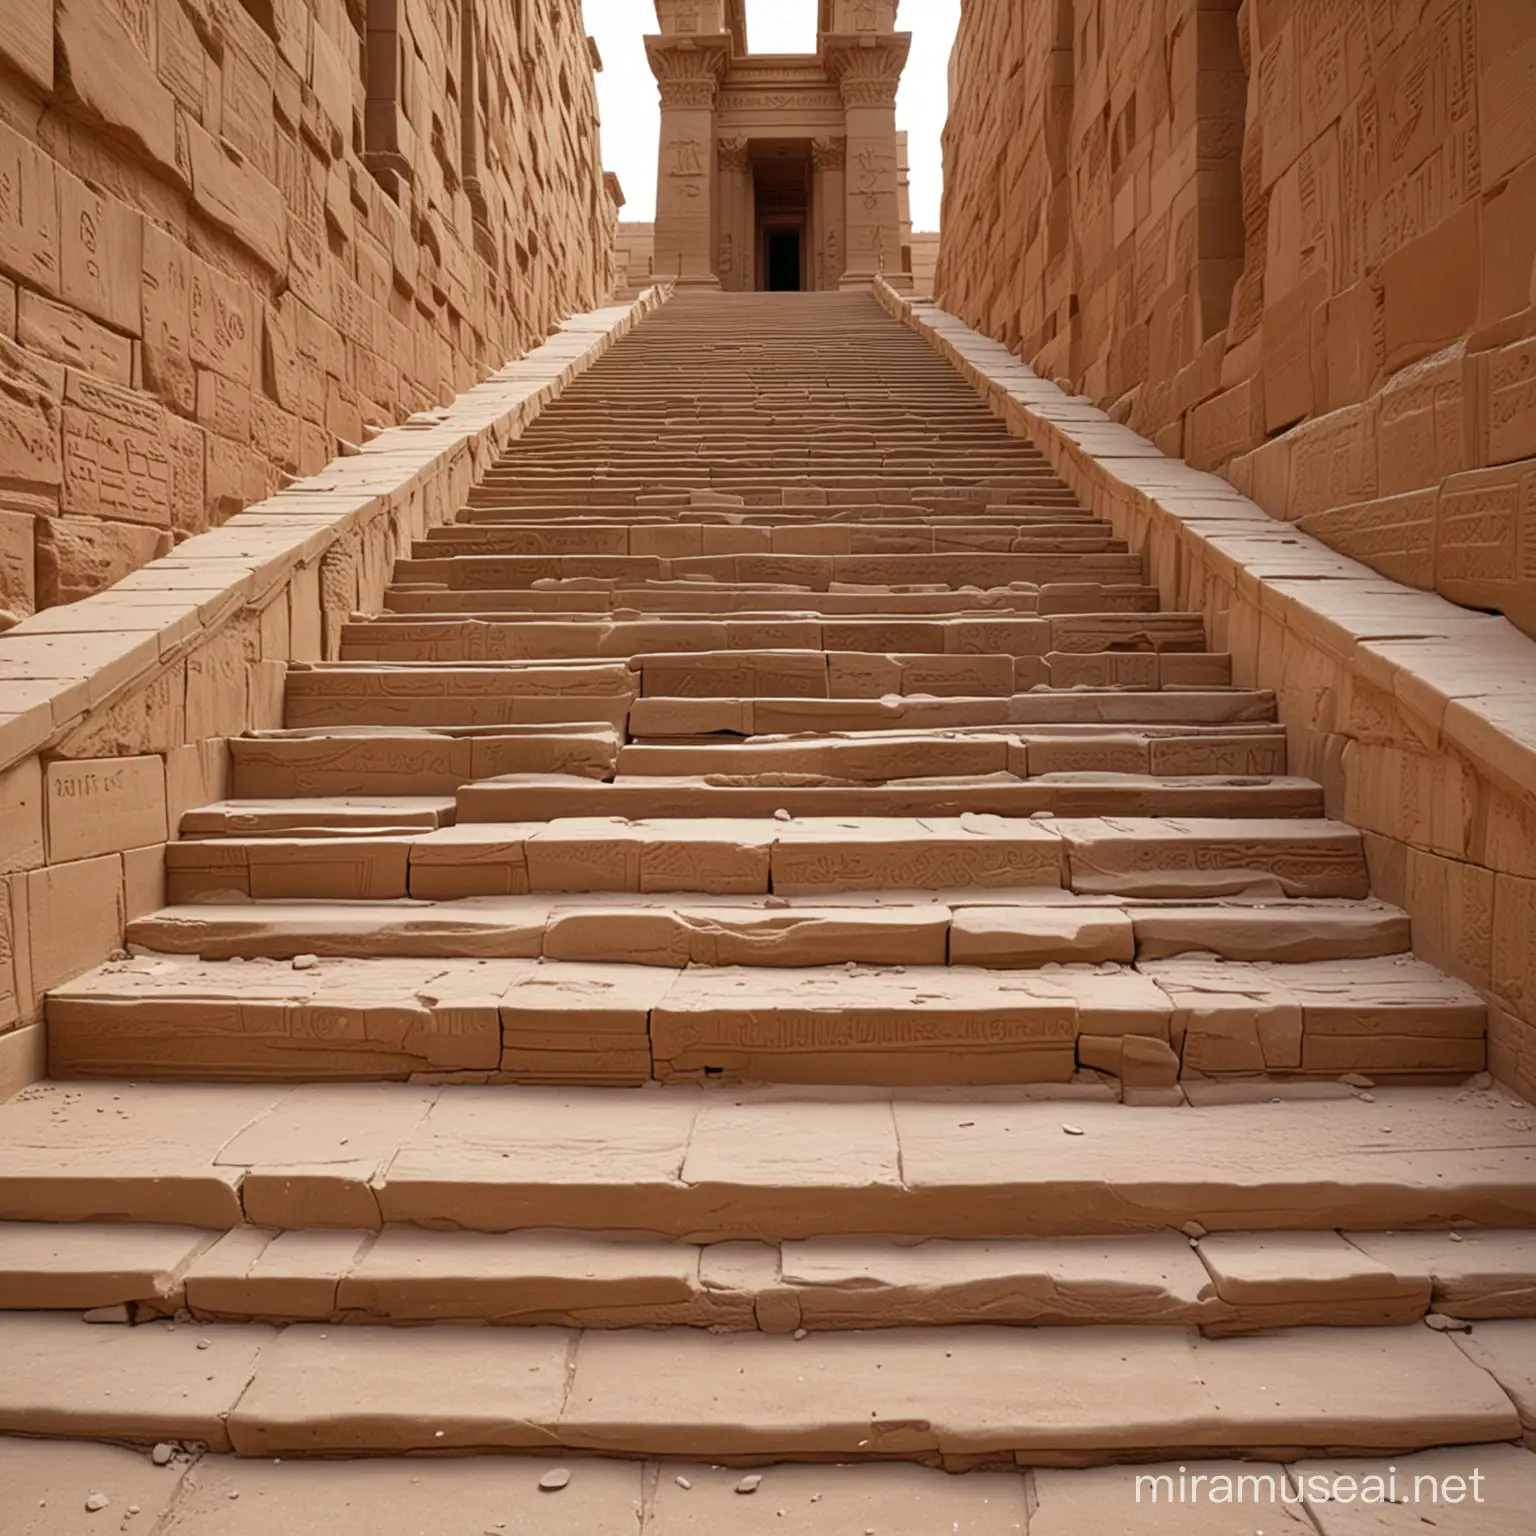 Grand Egyptian Sandstone Steps Leading to the Goddess Palace